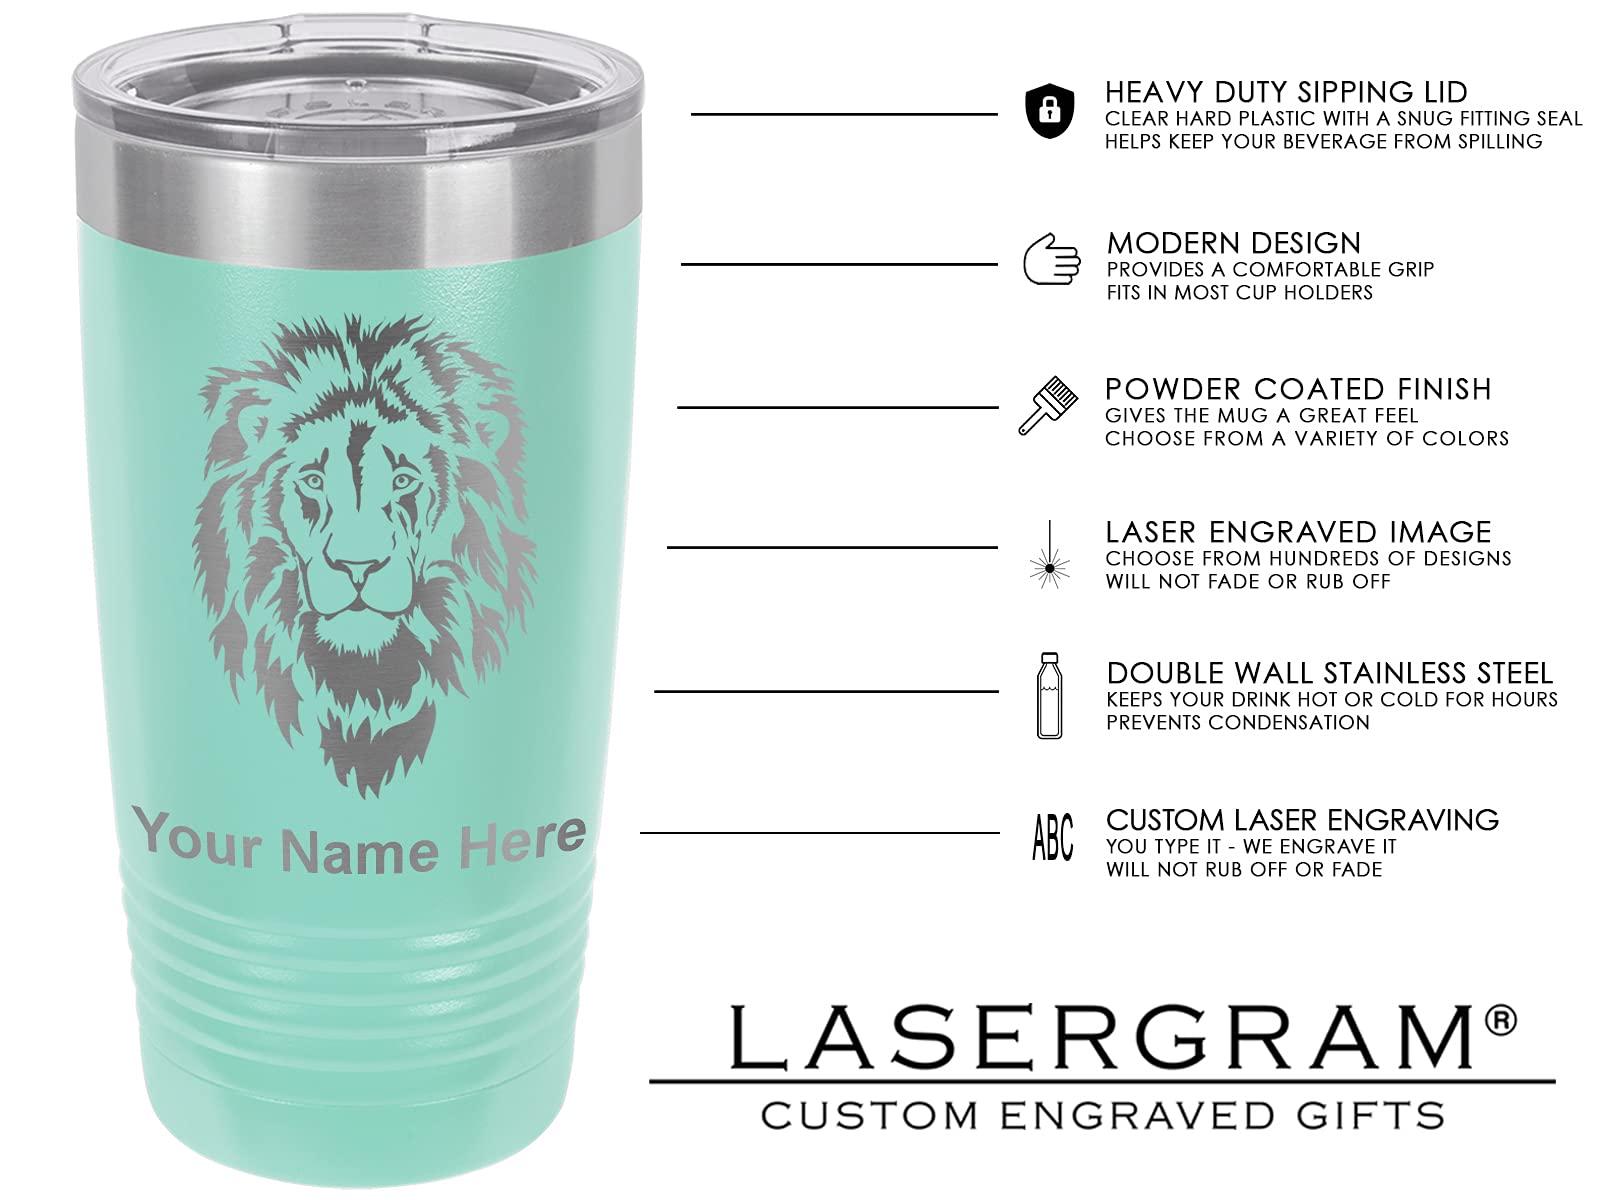 LaserGram 20oz Vacuum Insulated Tumbler Mug, Volleyball Ball, Personalized Engraving Included (Teal)